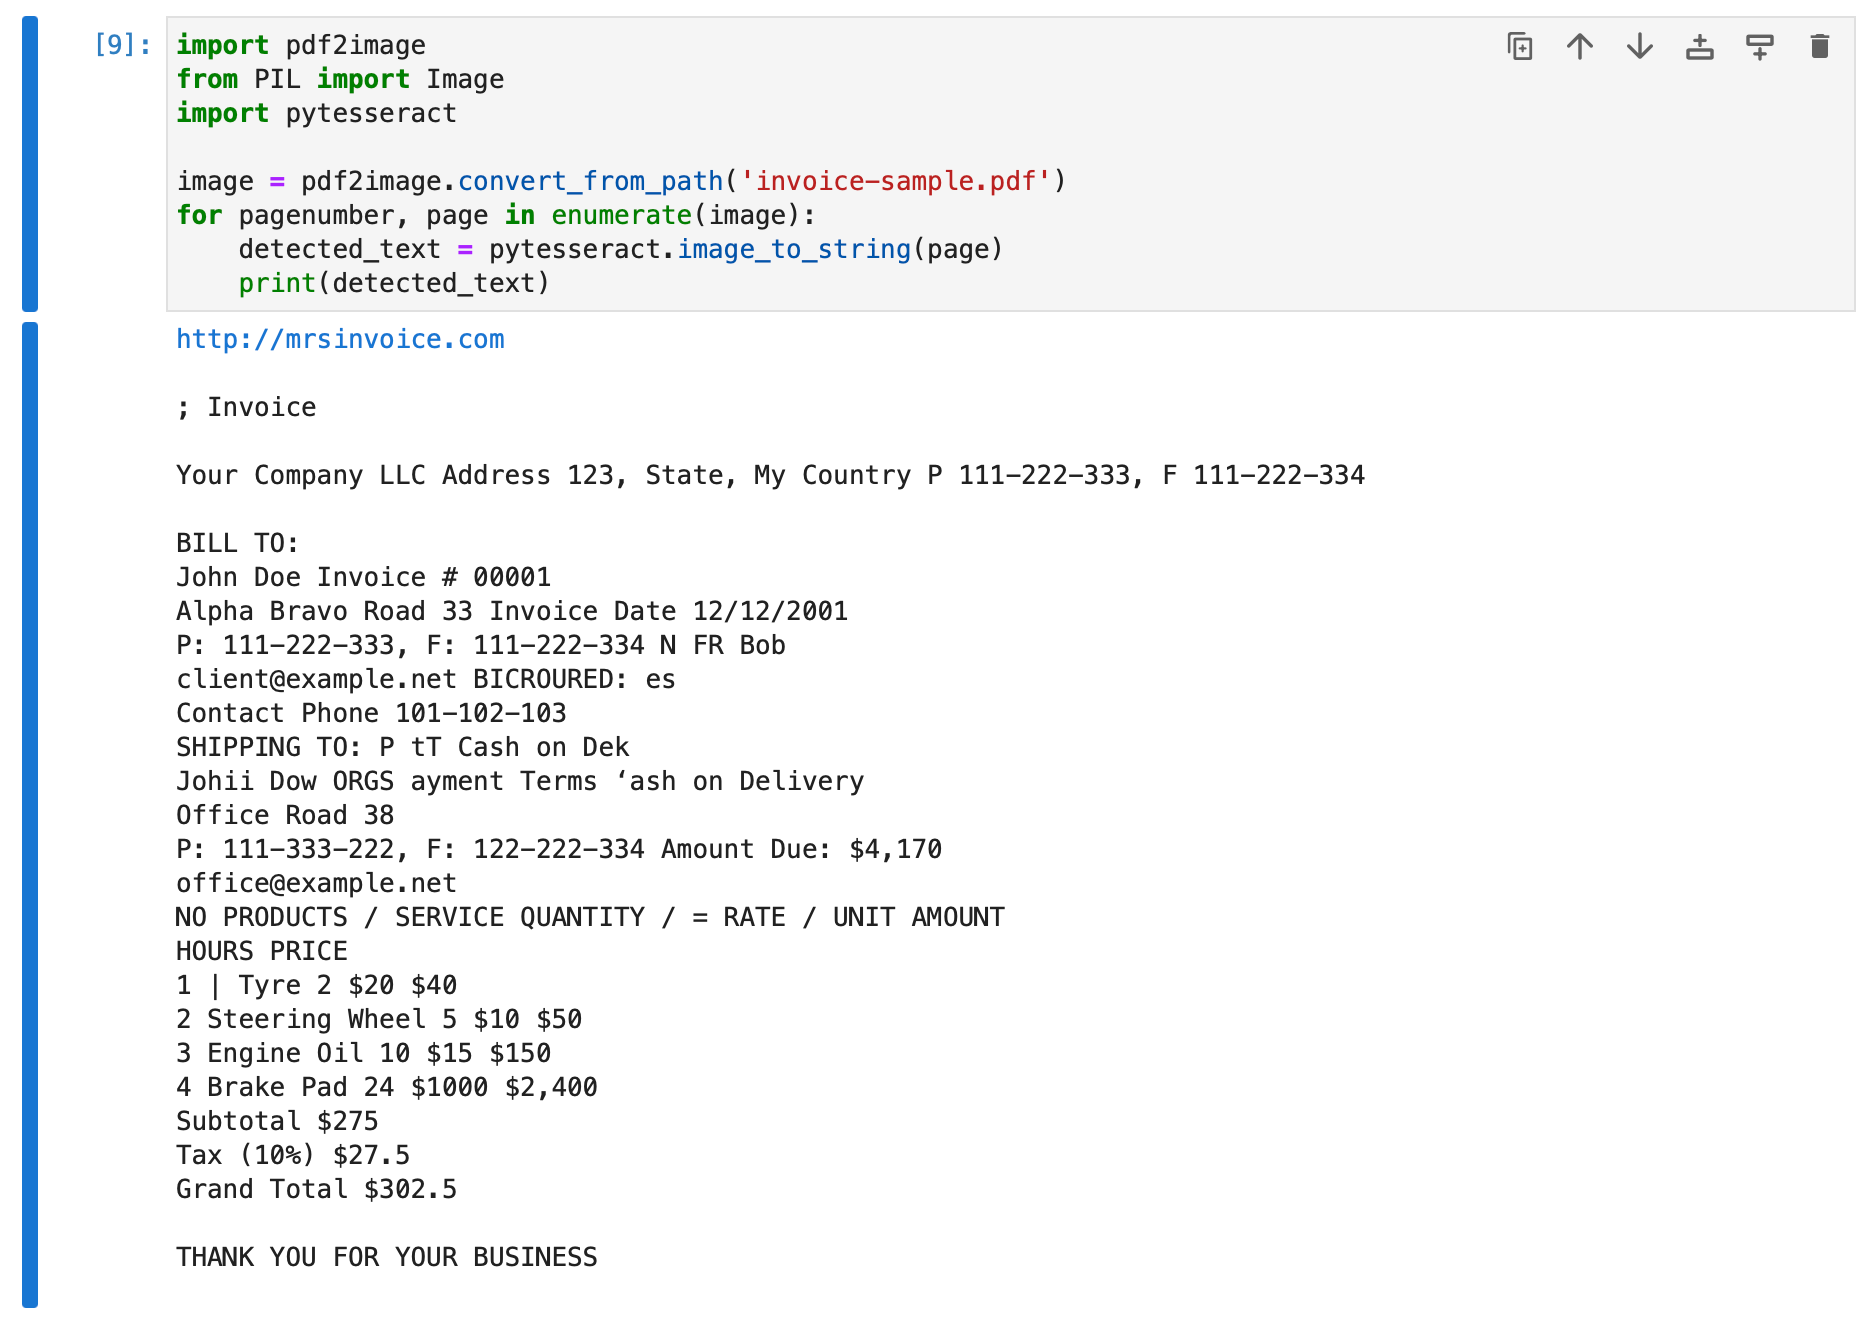 The output from the OCR engine when we run the python code snippet on the pdf invoice example ('invoice-sample.pdf')